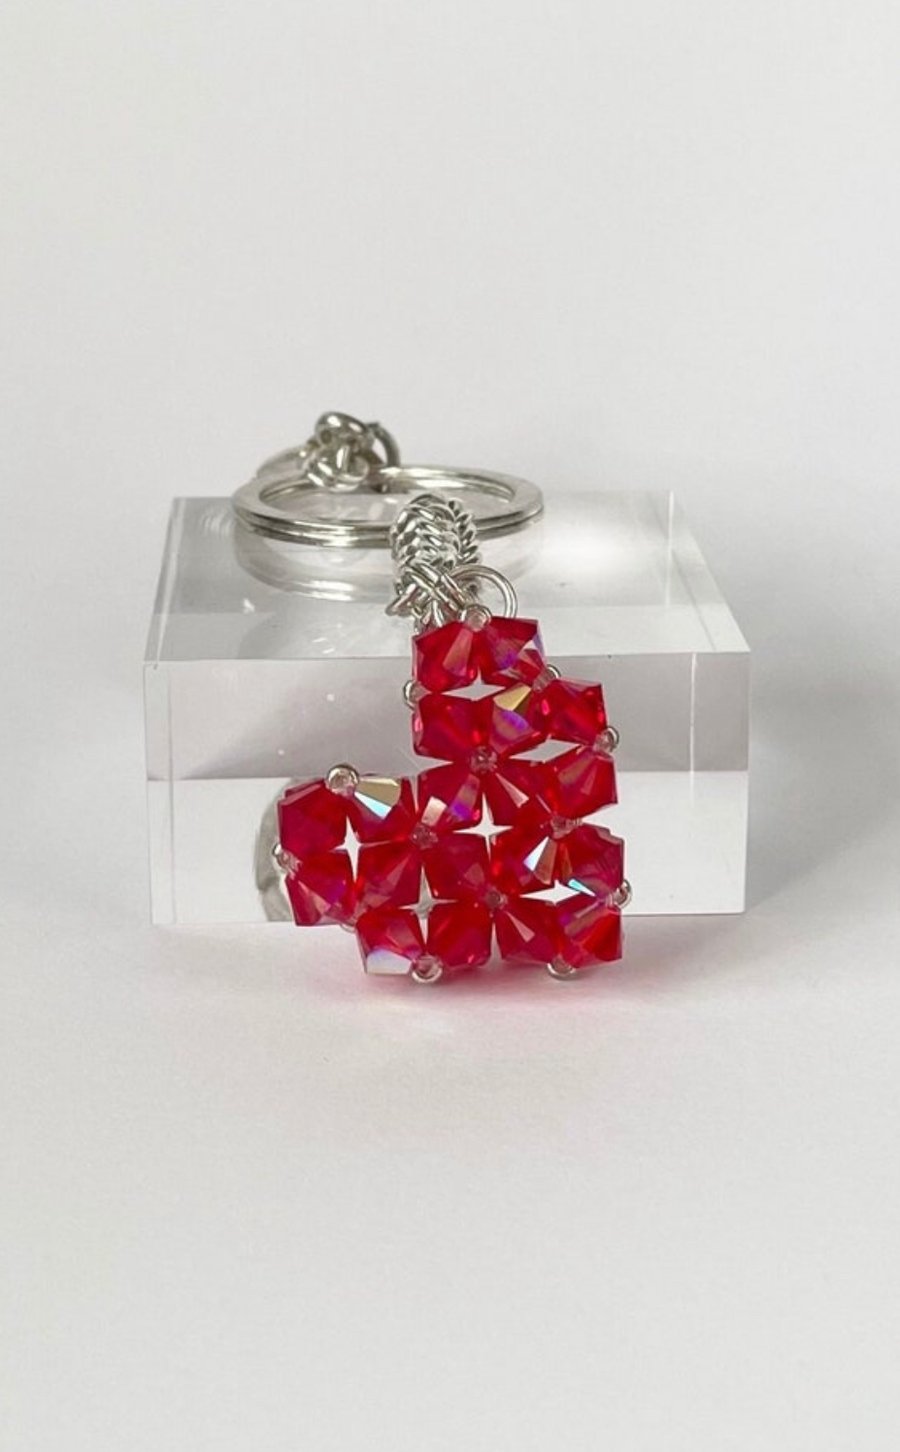 Handbag Charm, Red Crystal Heart, with a Chainmaille Chain and Keyring